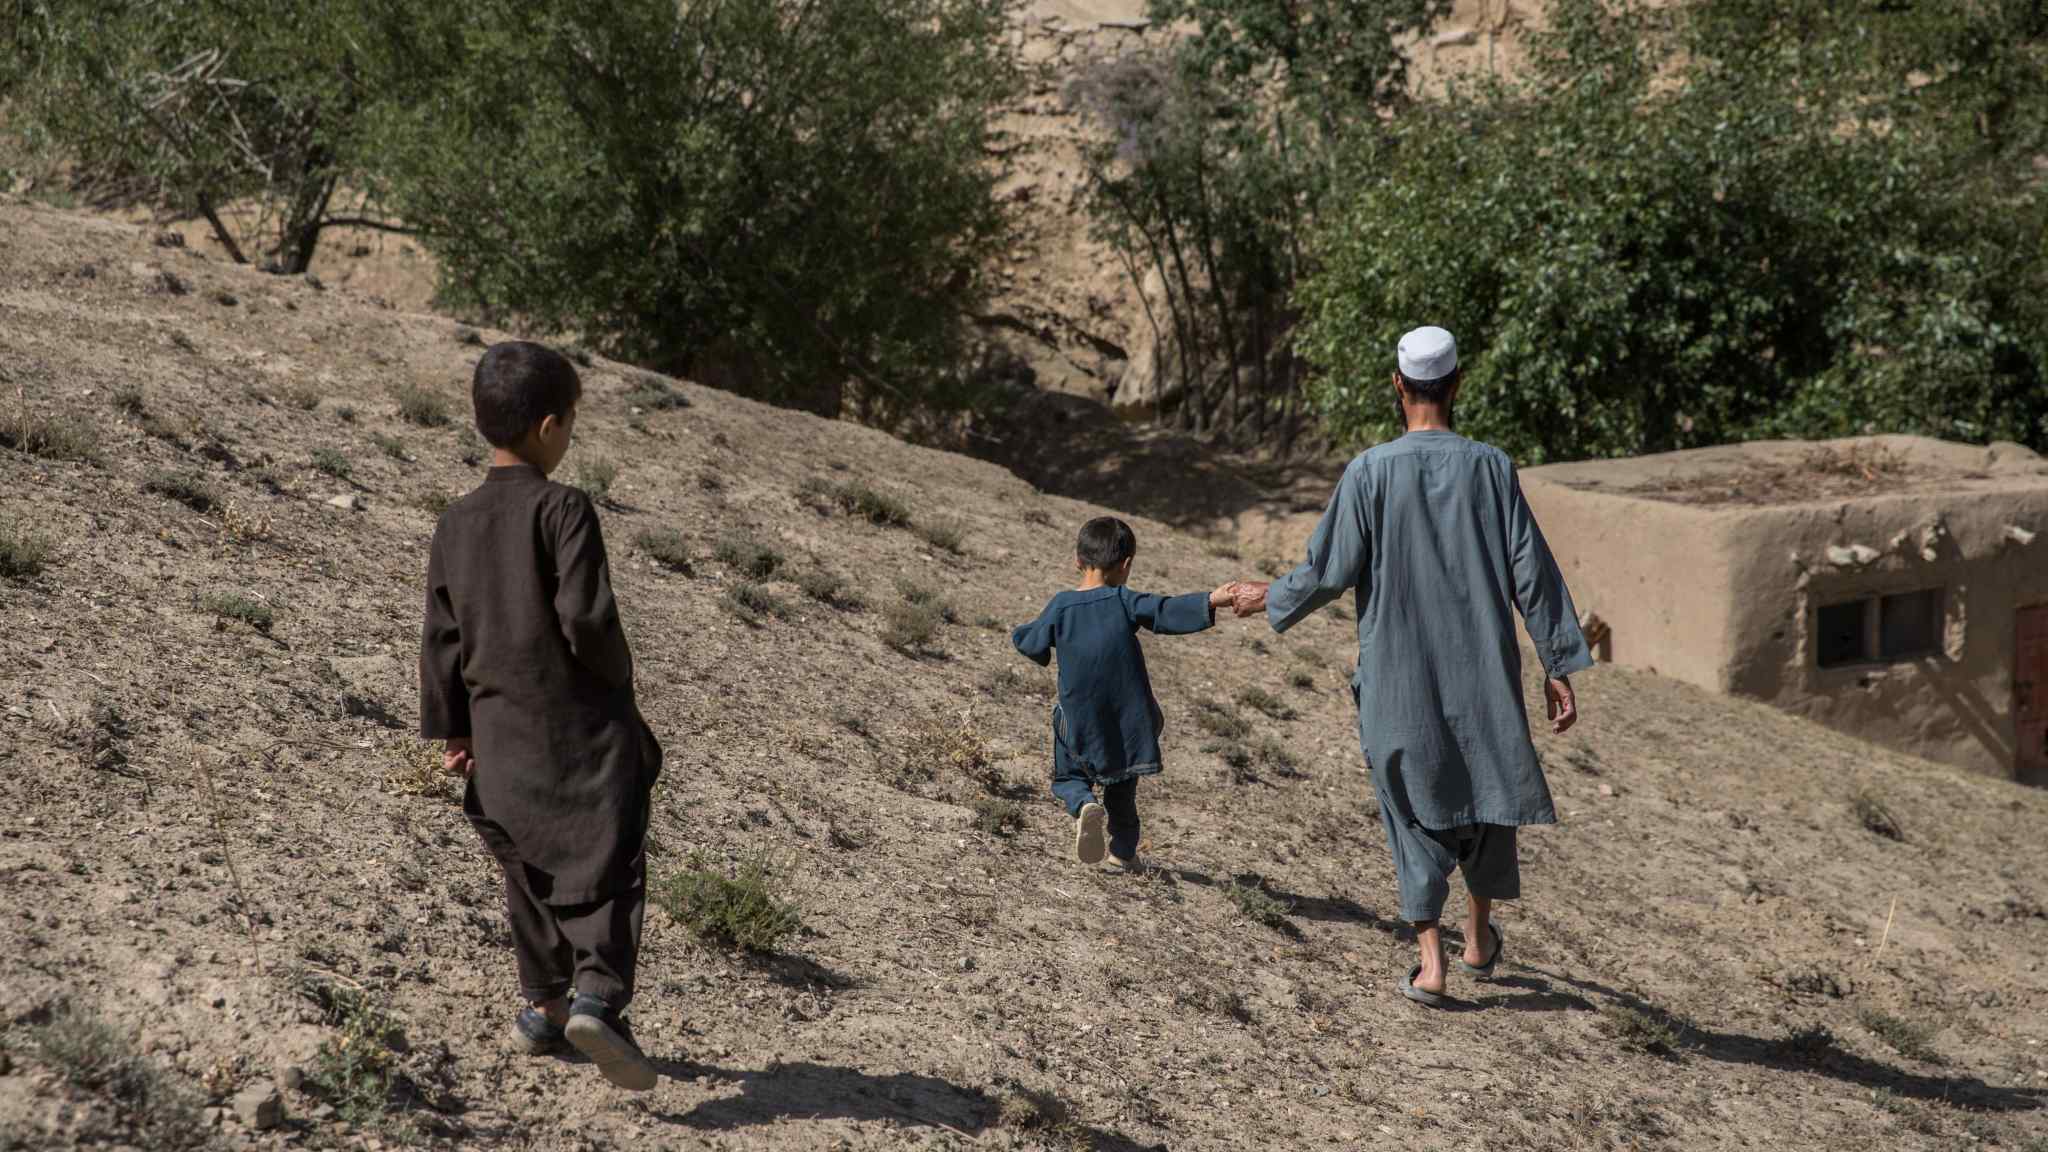 The village wedding caught in the Taliban’s battle for Kabul